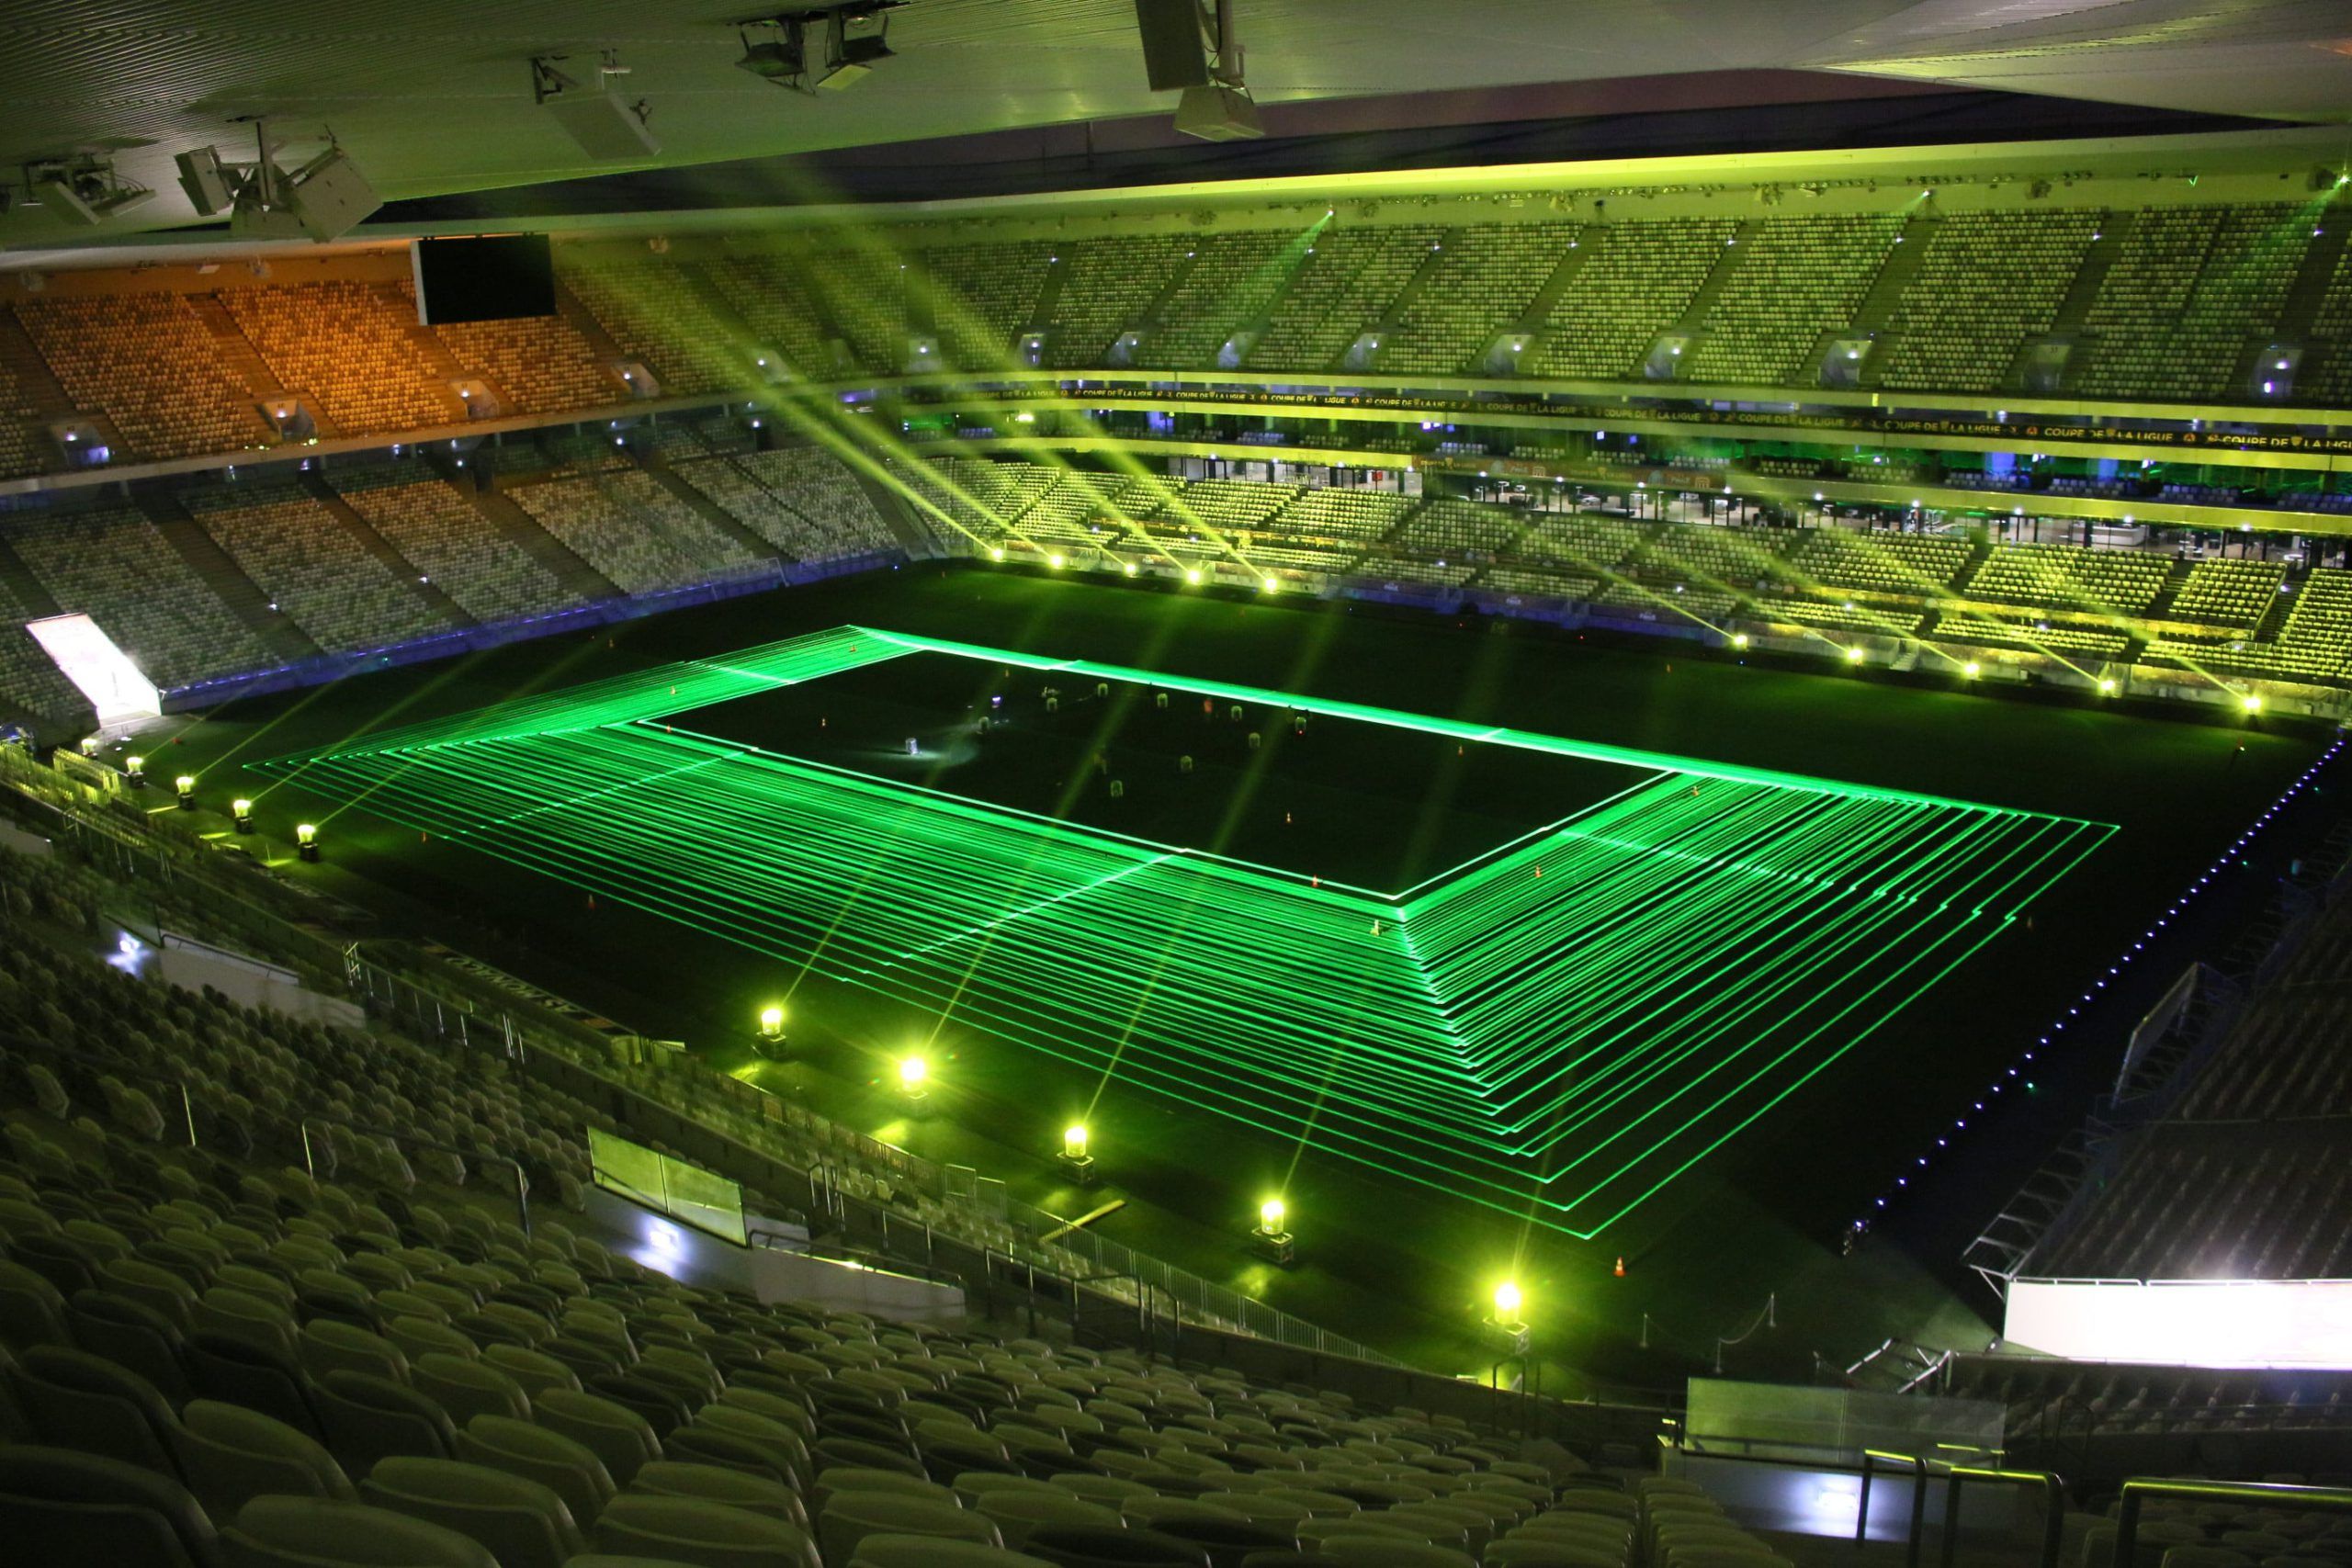 Europe Évènement - Sport Events Mapping - Photo of a stadium with green lines projected in the center